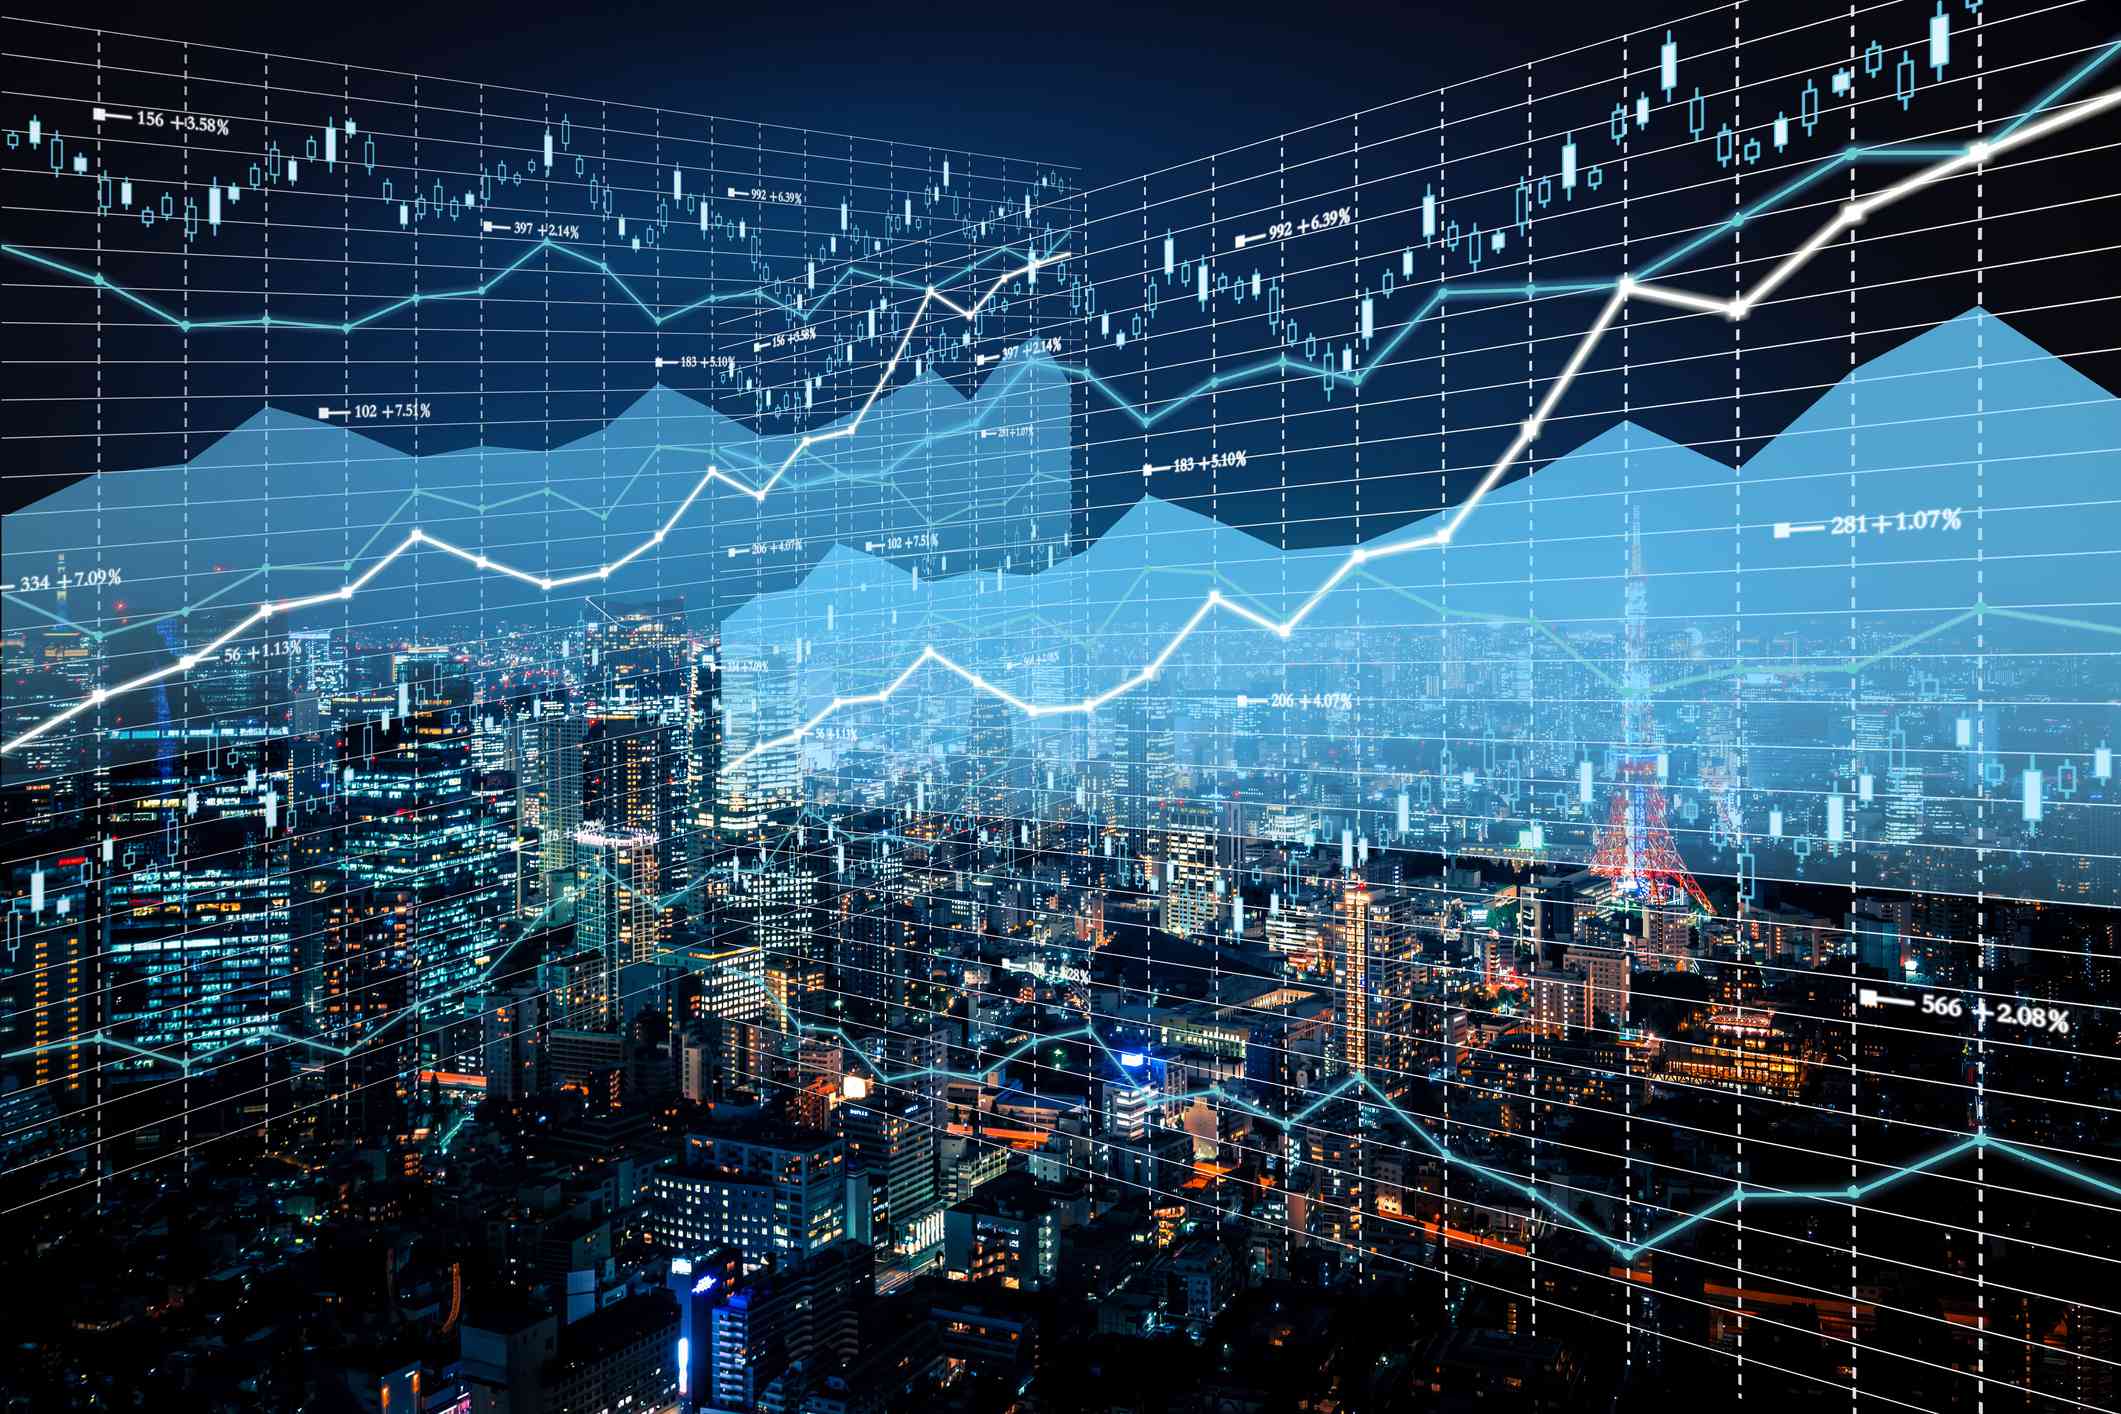 Financial line graphs overlaid with cityscape at night